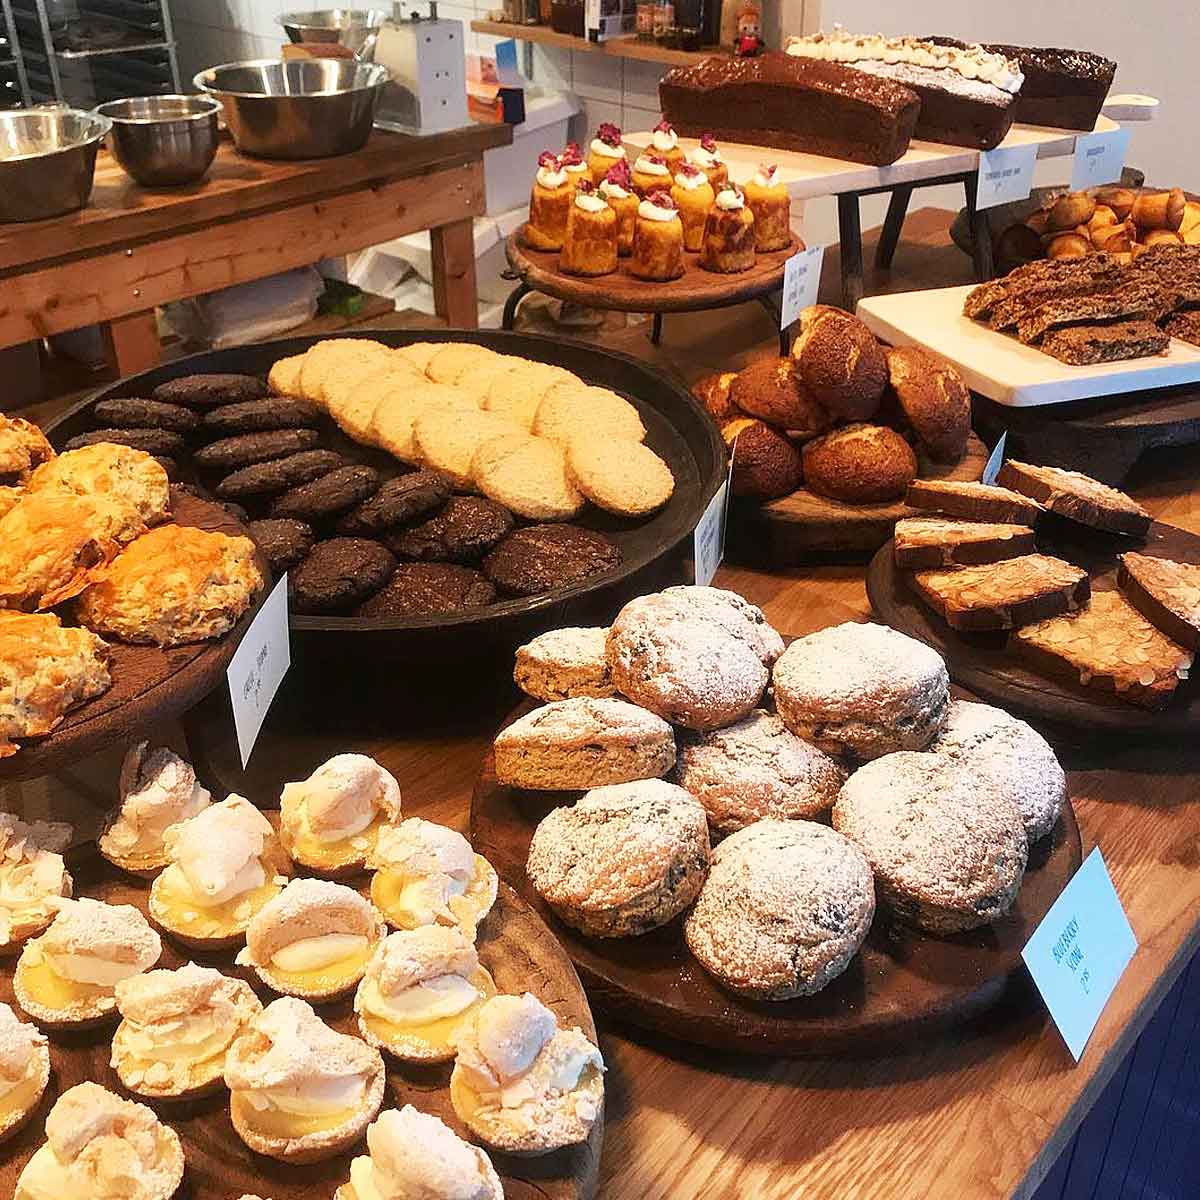 Our craft bakery counter